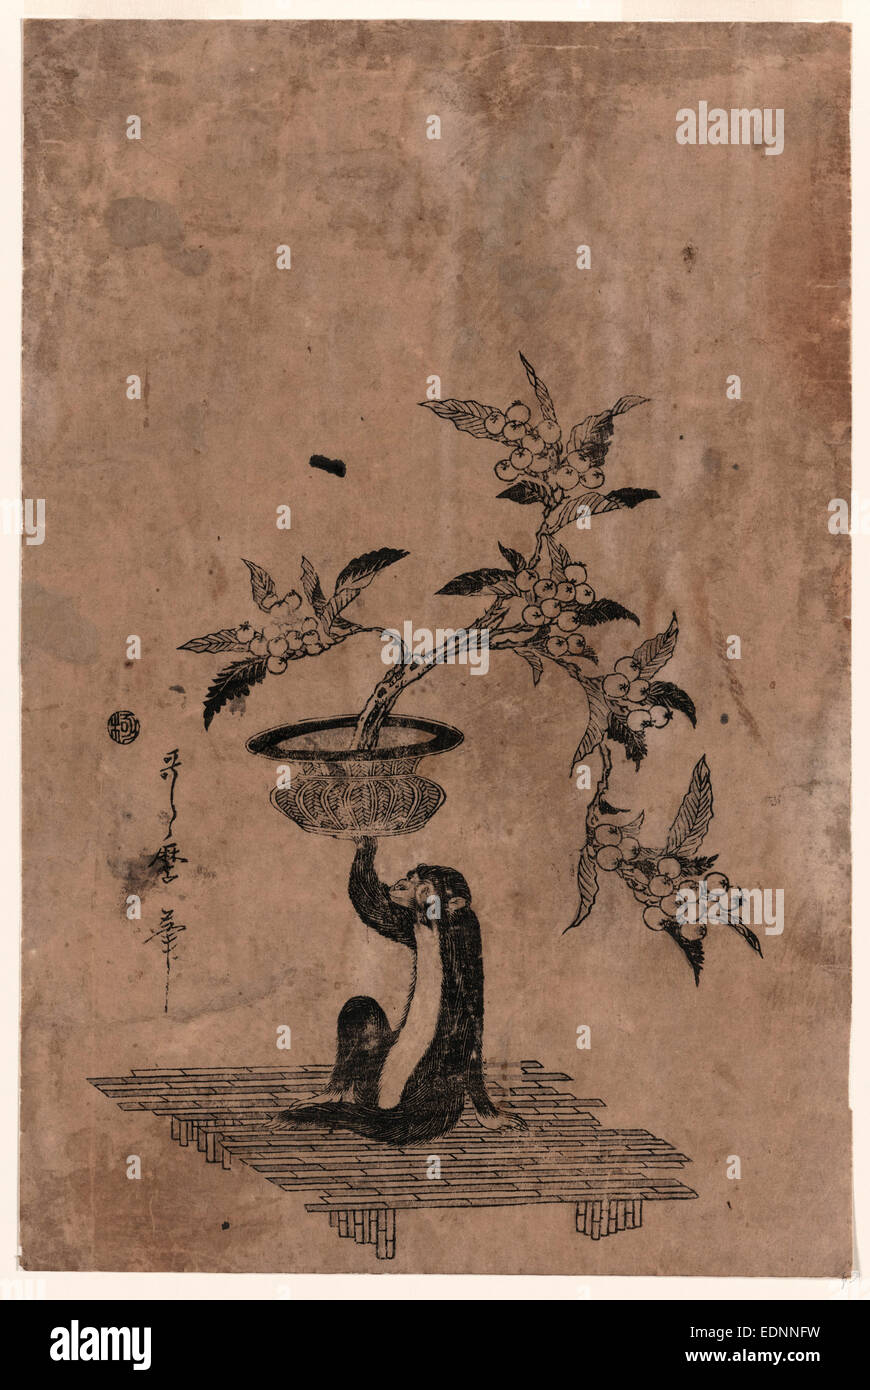 Saru no hanaike ni biwa, Monkey holding a potted loquat., Utamaro II, -approximately 1831, artist, [between 1807 and 1812], 1 print : woodcut, color ; 35 x 23.2 cm., Print shows a monkey sitting on a bamboo mat with right hand raised, holding a flower pot containing a loquat plant laden with fruit. Stock Photo